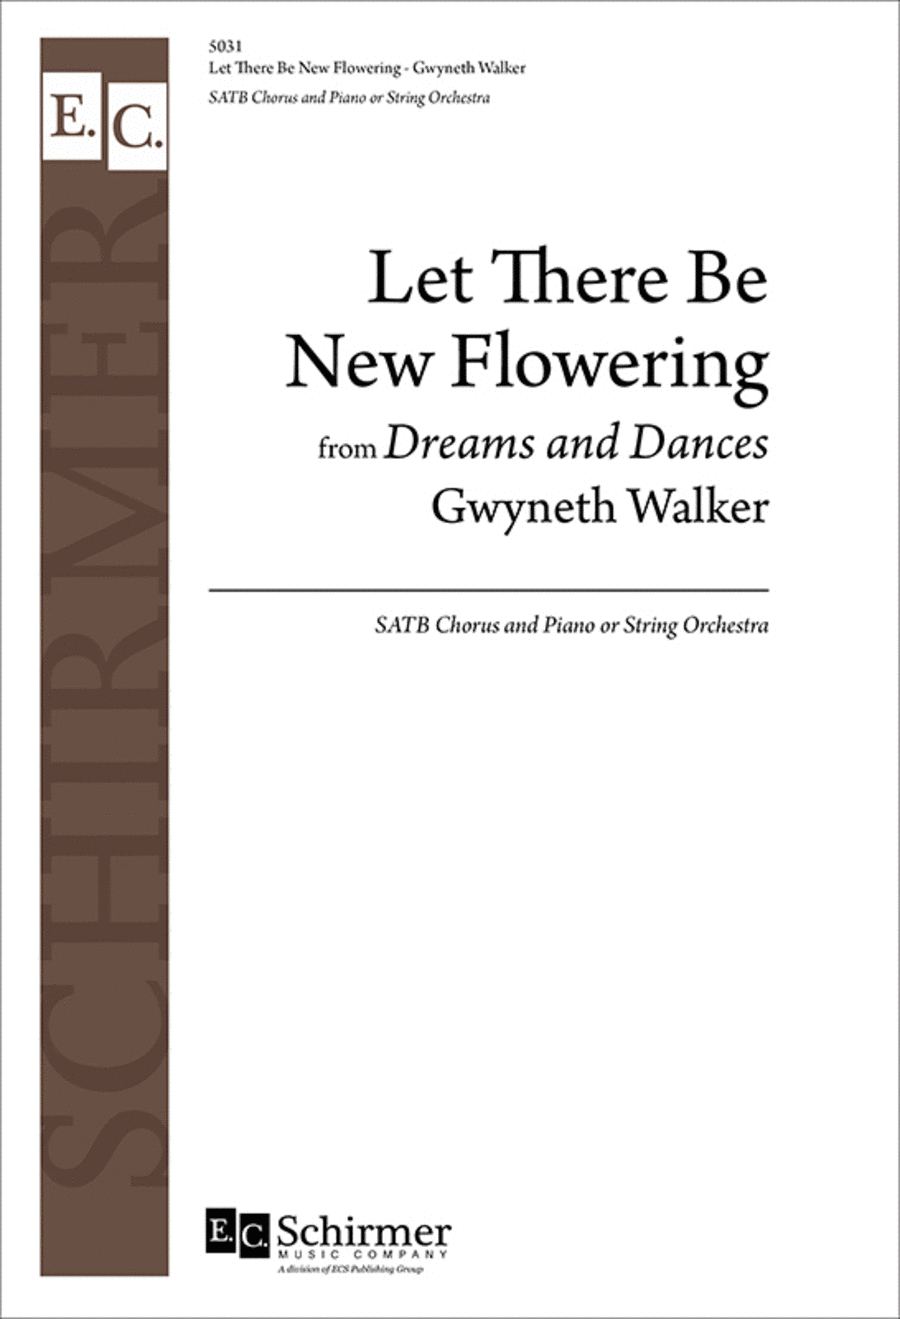 Let There Be New Flowering (No. 3 from Dreams and Dances)